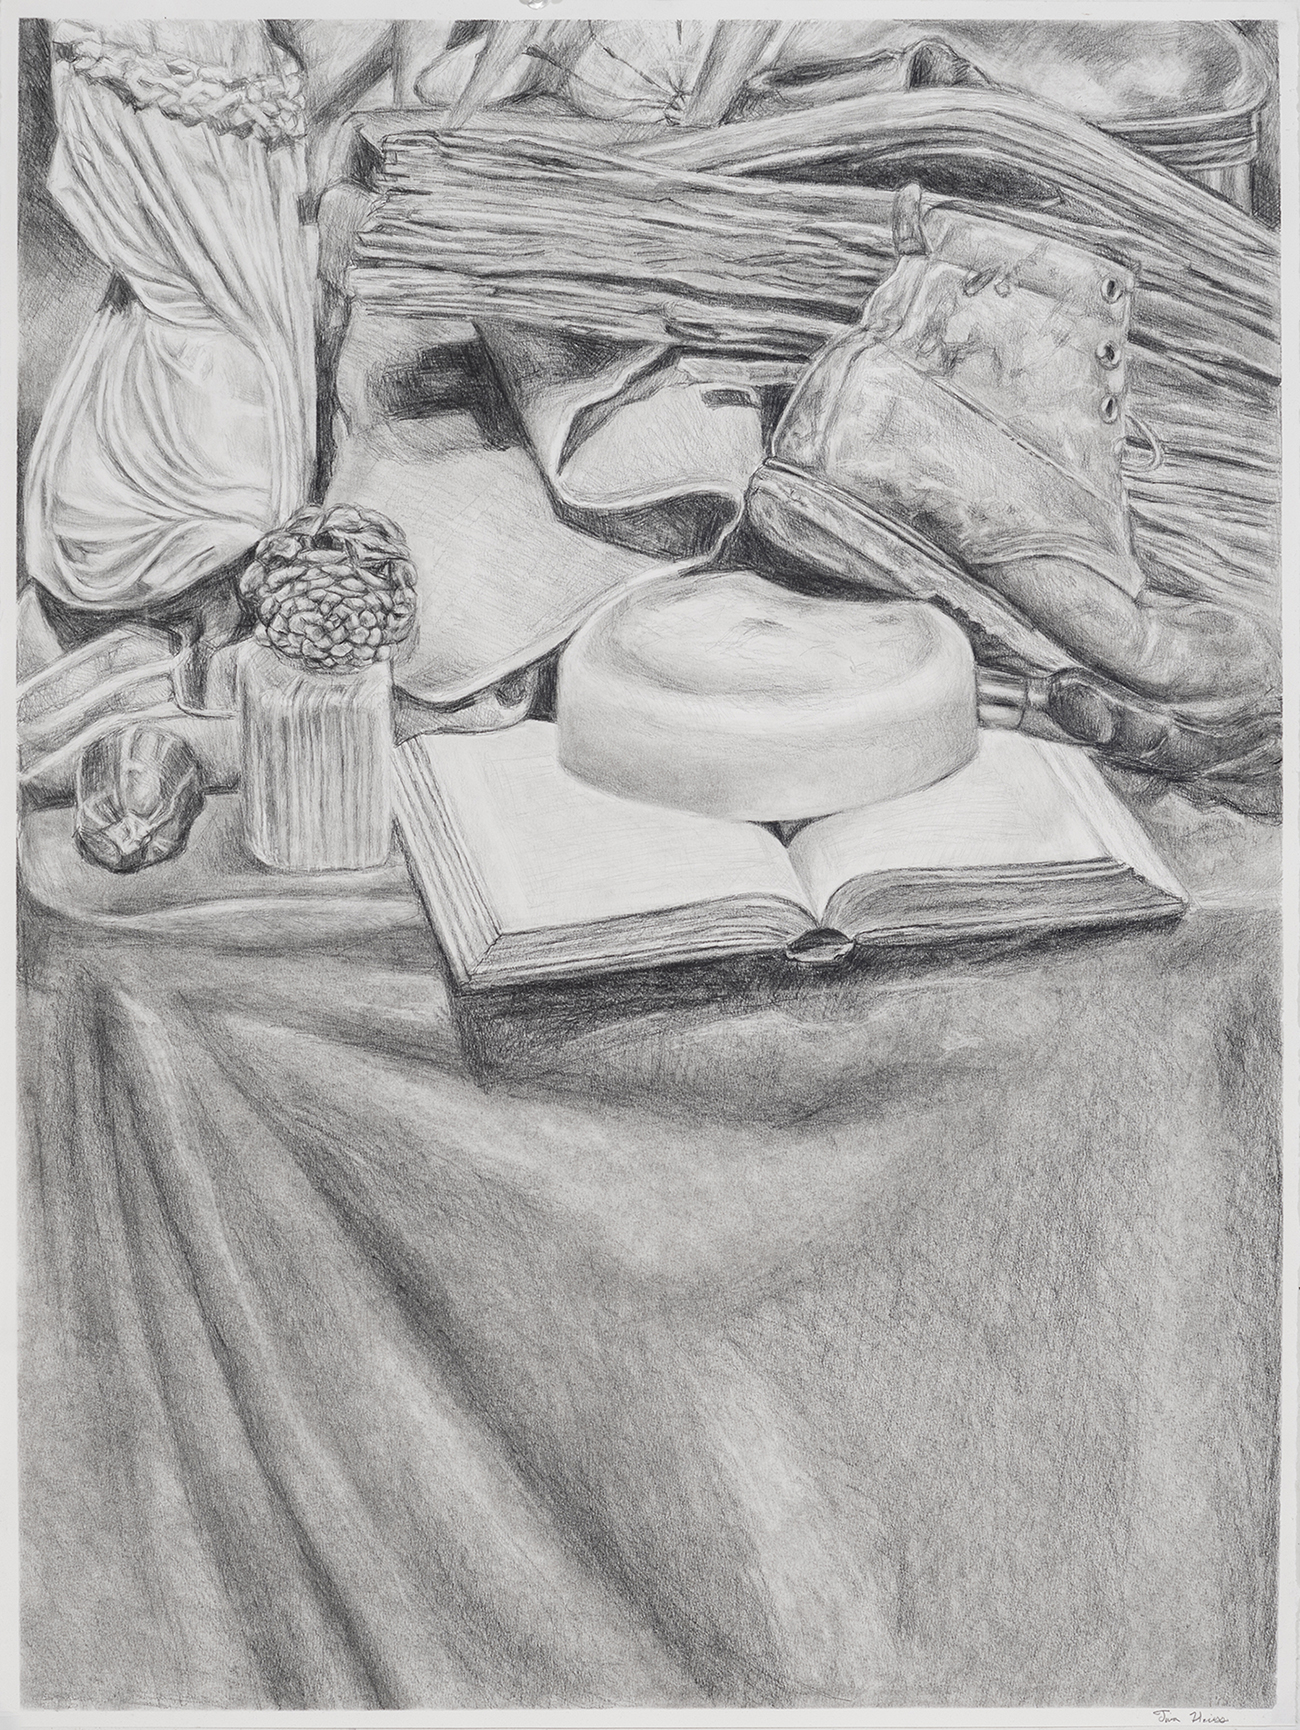 A still-life drawing of a book, boot, decor and other objects.